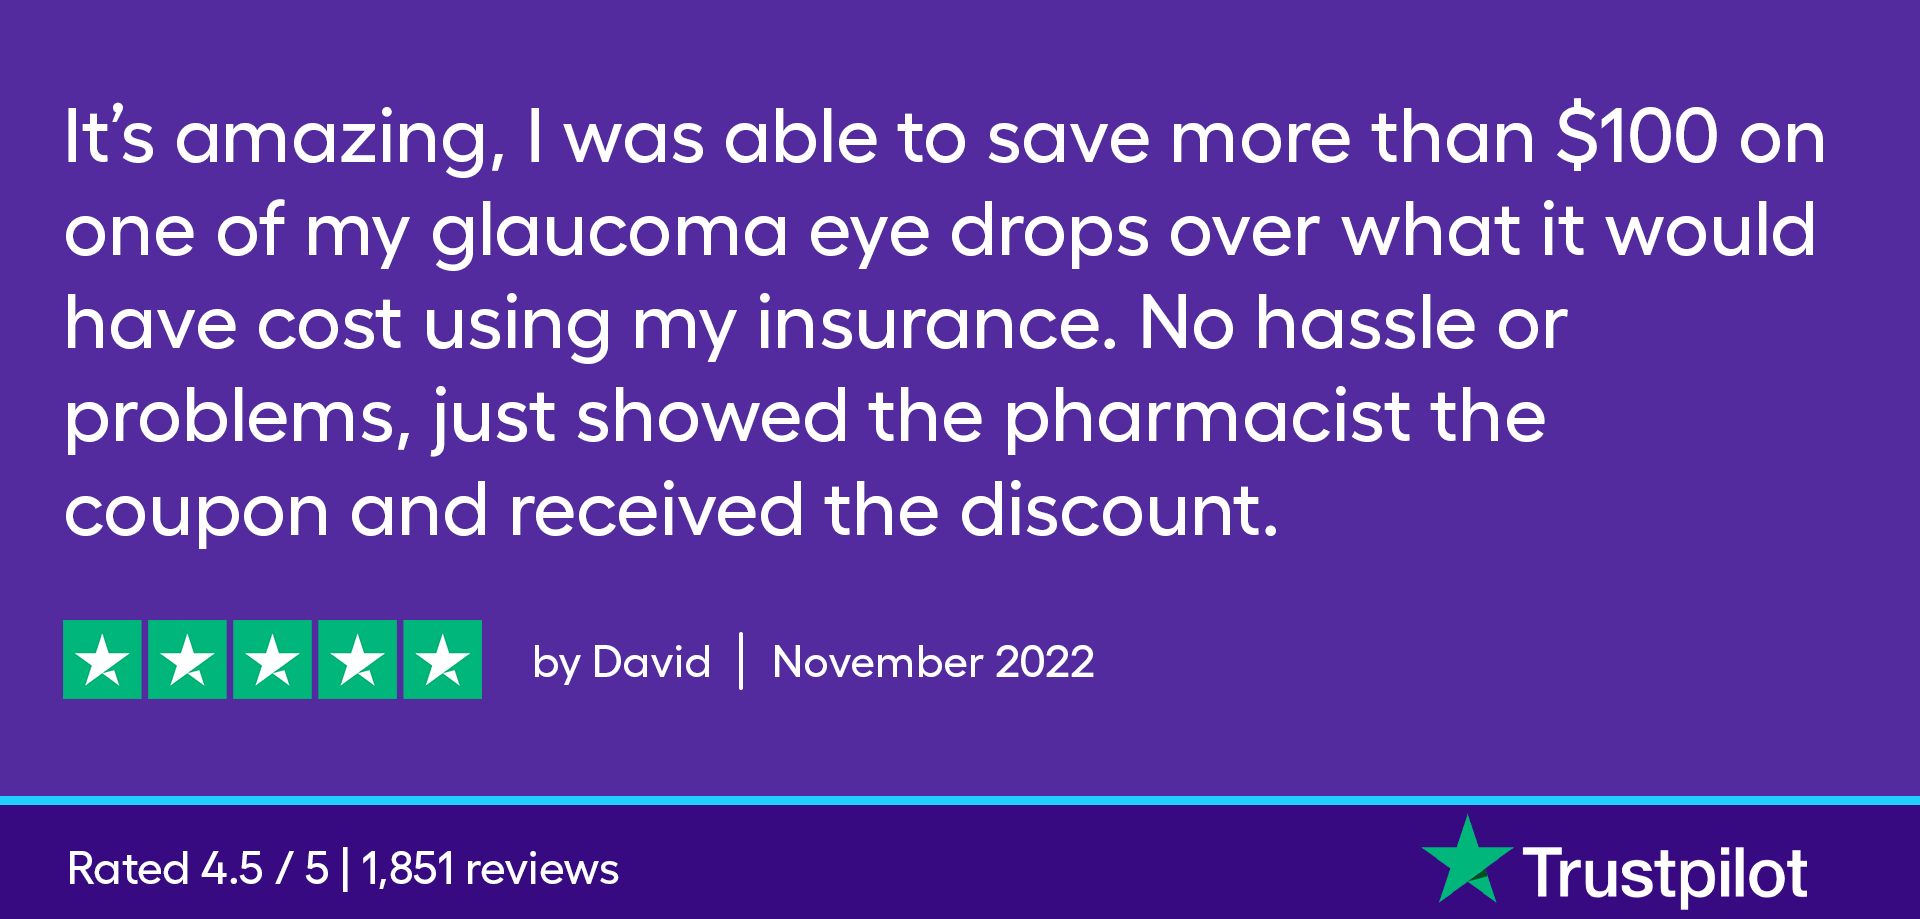 It’s amazing, I was able to save more than $100 on one of my glaucoma eye drops over what it would have cost using my insurance. No hassle or problems, just showed the pharmacist the coupon and received the discount.